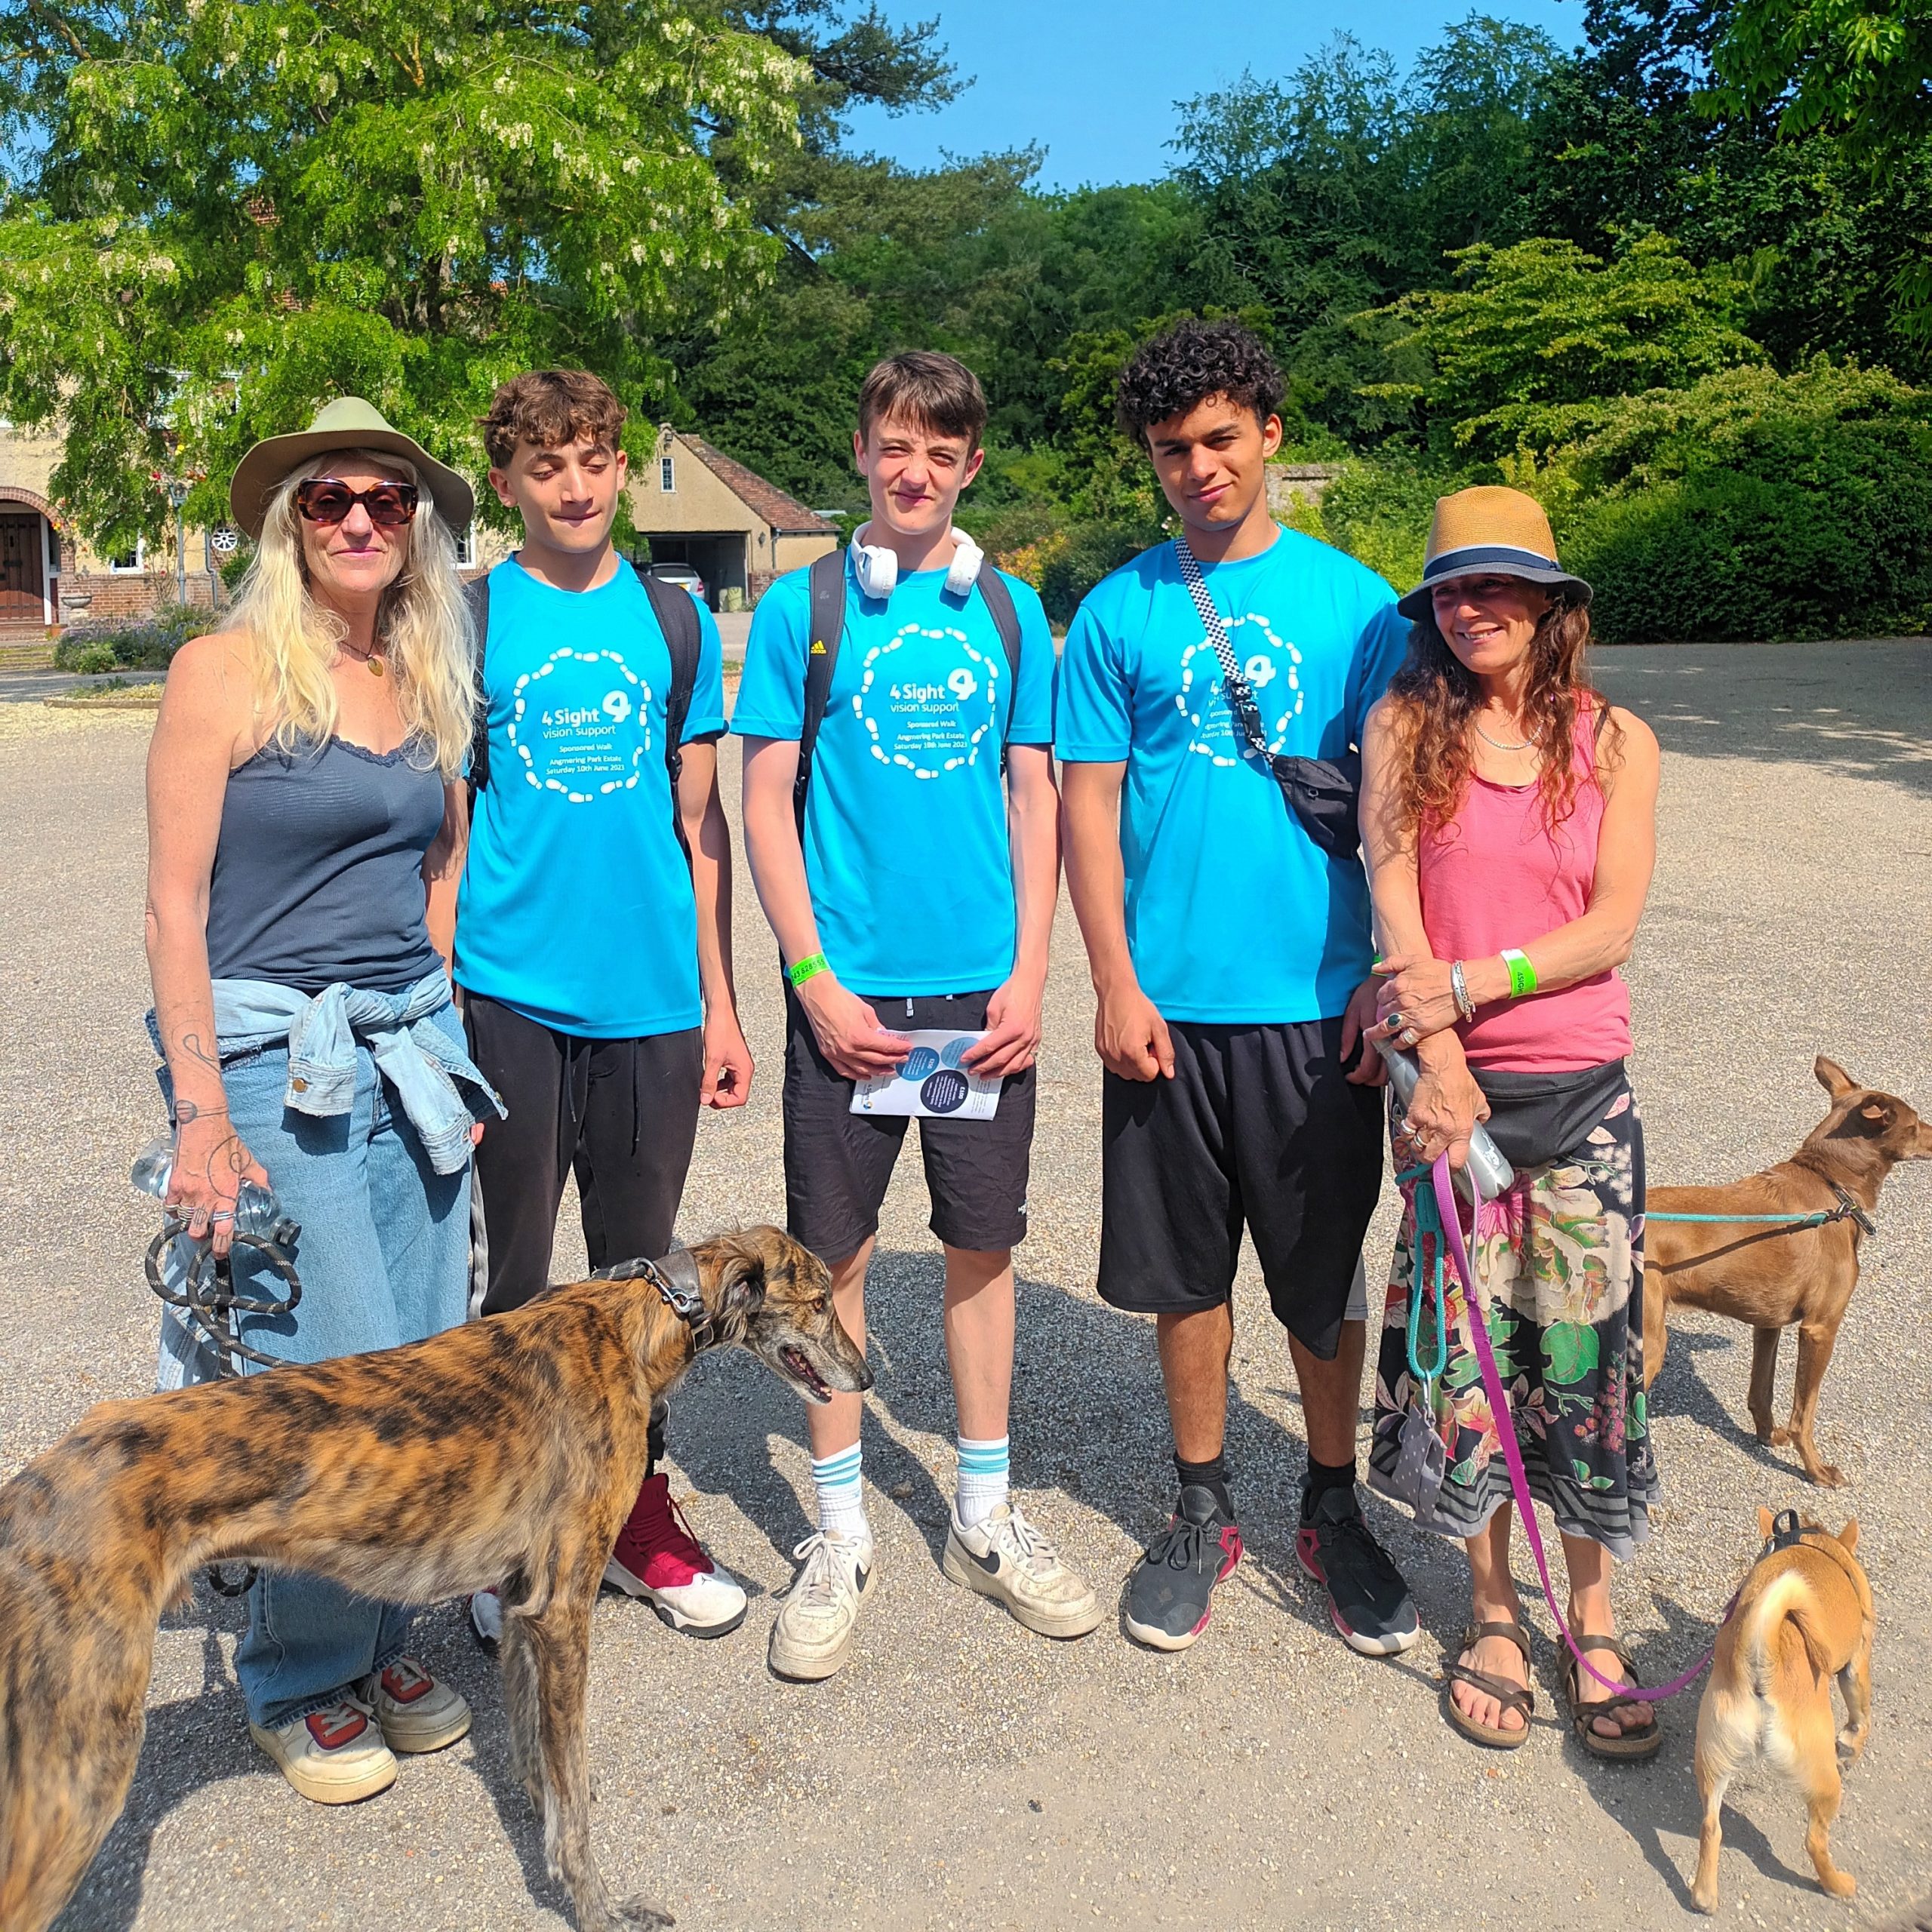 A group of walkers (2 women and 3 teenage boys) are stood in a line together with 3 dogs smiling towards the camera before they set off on their walk.